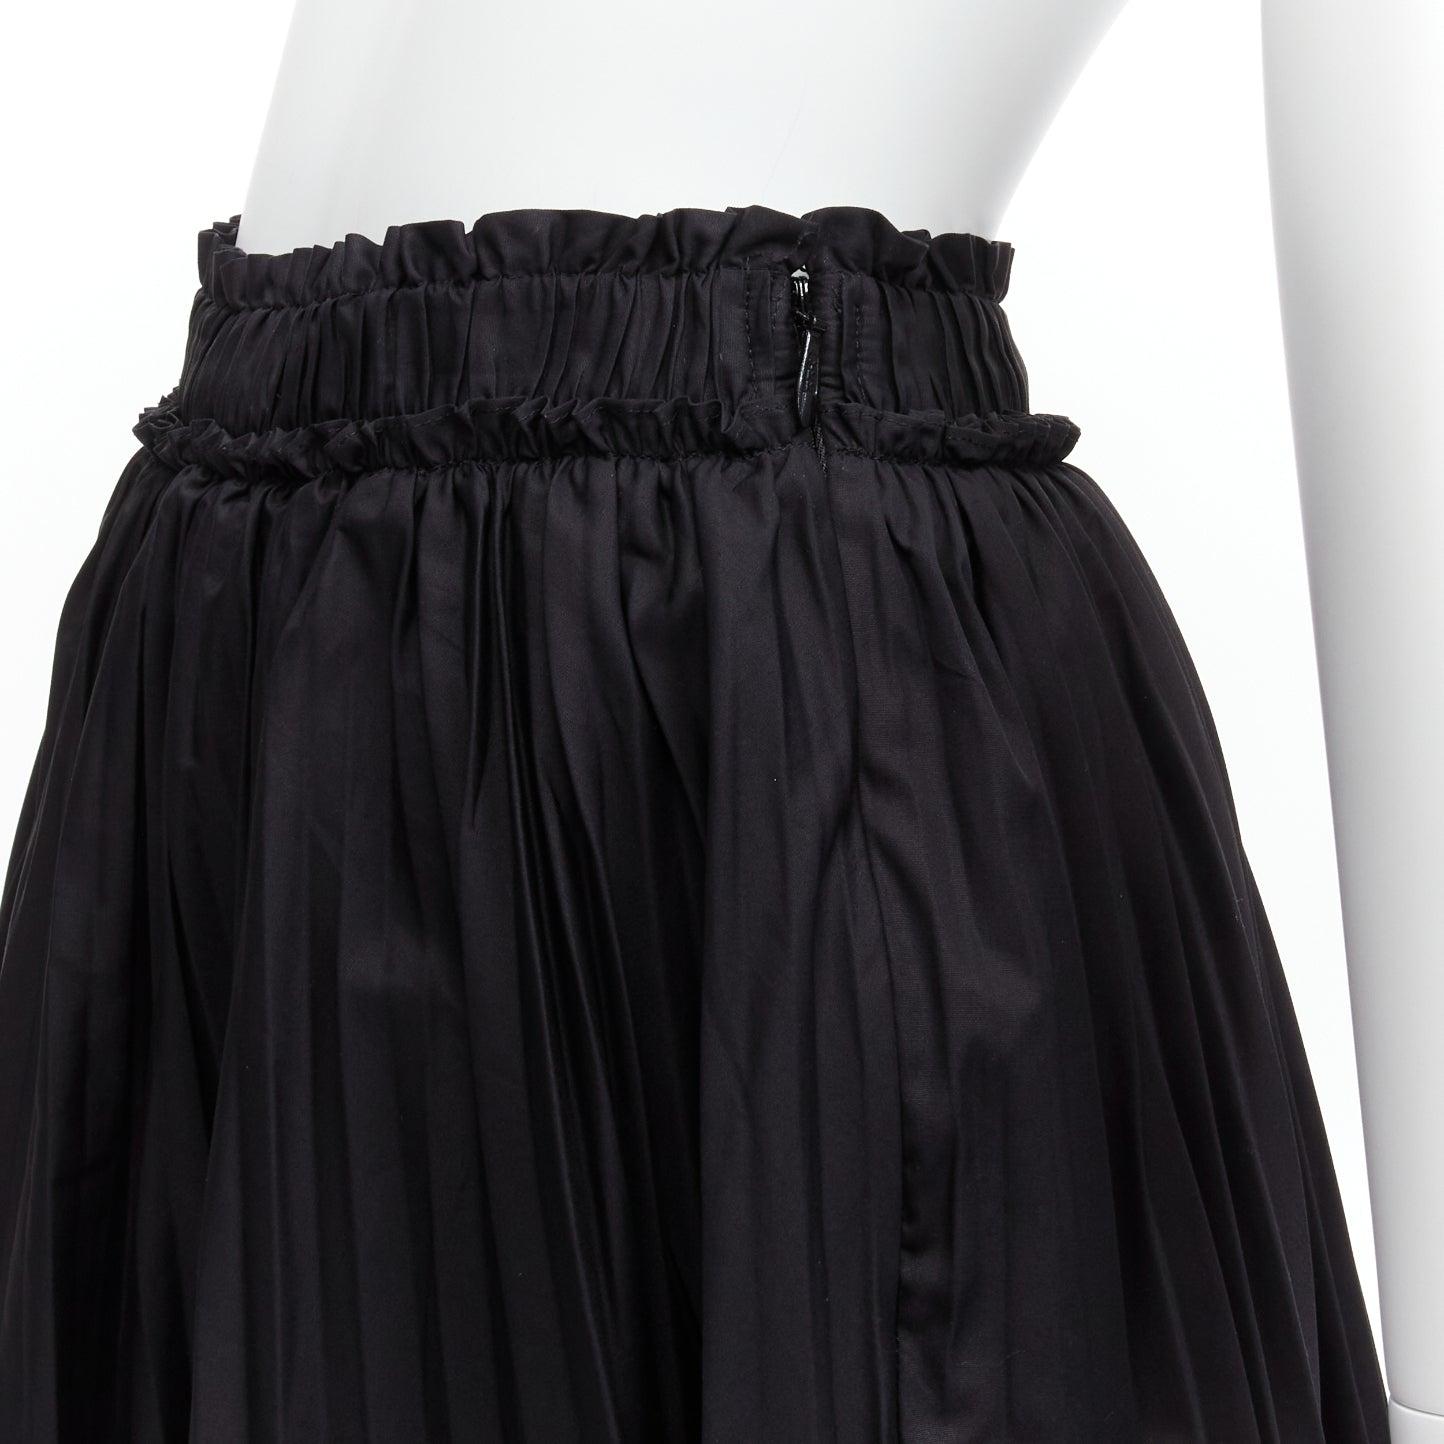 TOD'S black cotton asymmetric high low pleated flared skirt IT38 XS
Reference: CAWG/A00288
Brand: Tod's
Material: Cotton
Color: Black
Pattern: Solid
Closure: Drawstring
Extra Details: No lining. Adjustable waist.
Made in: